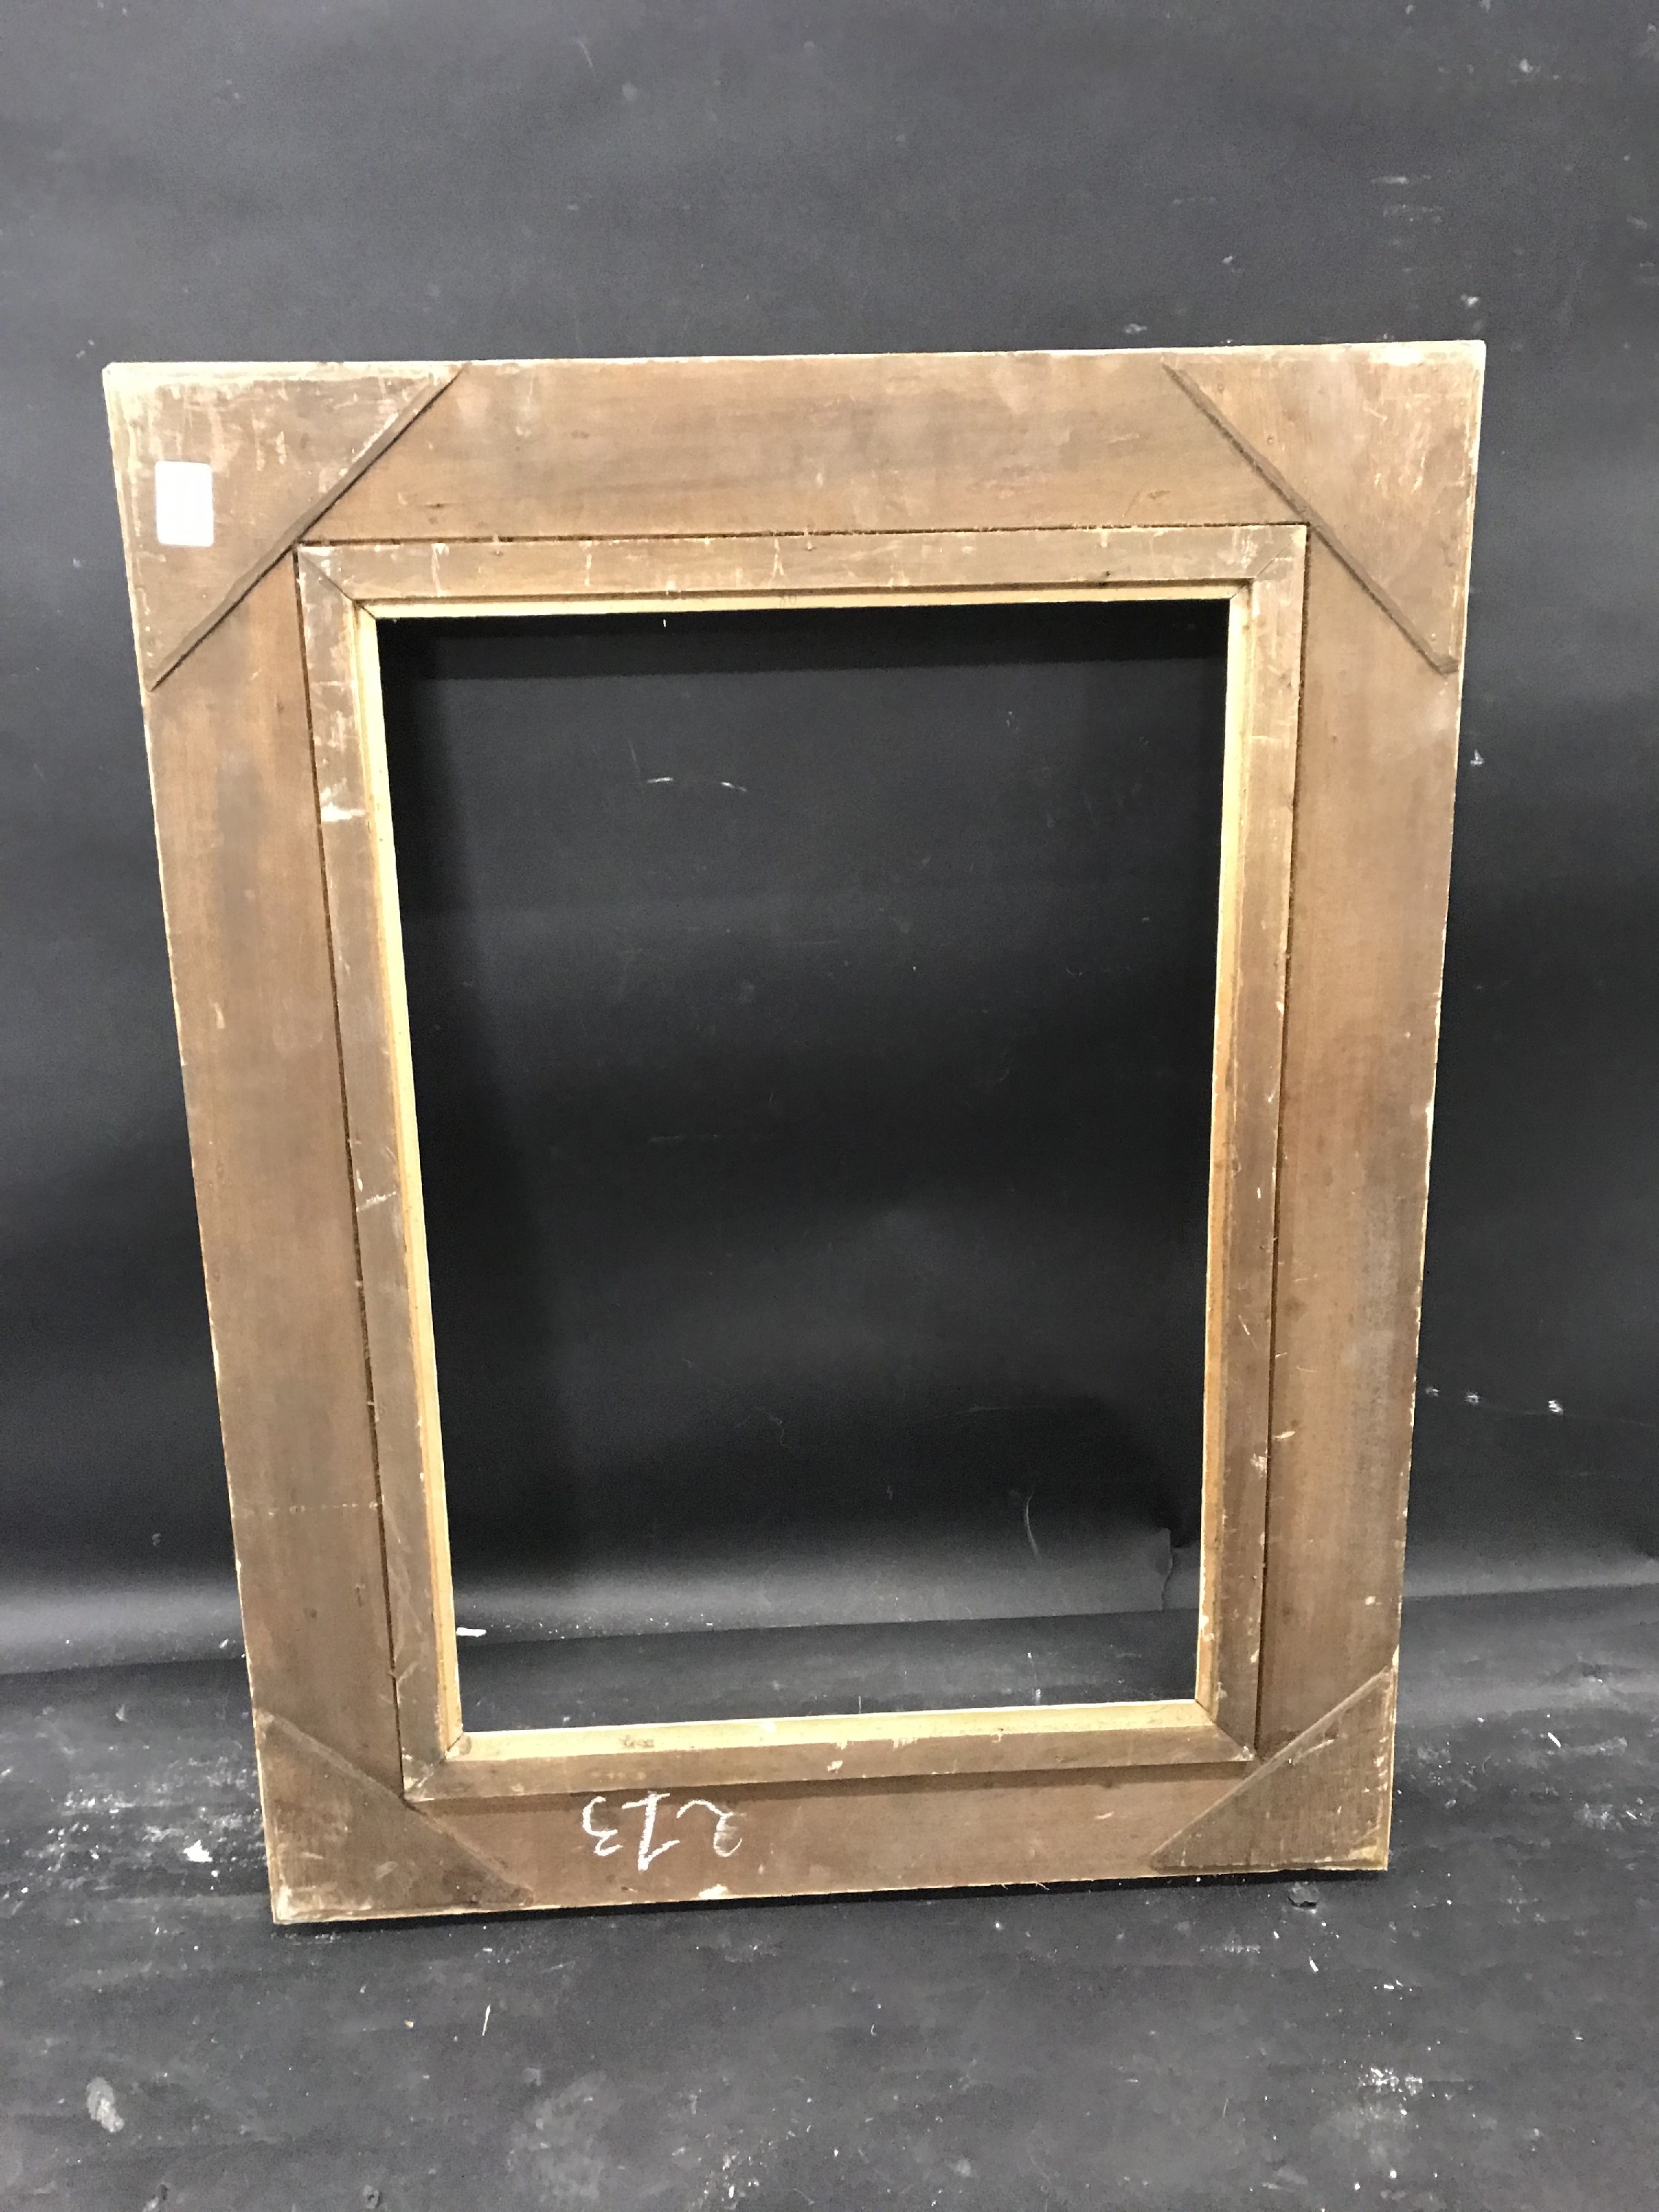 20th Century English School. A Carved Wood Painted Frame, 21.5" x 15" (rebate). - Image 3 of 3